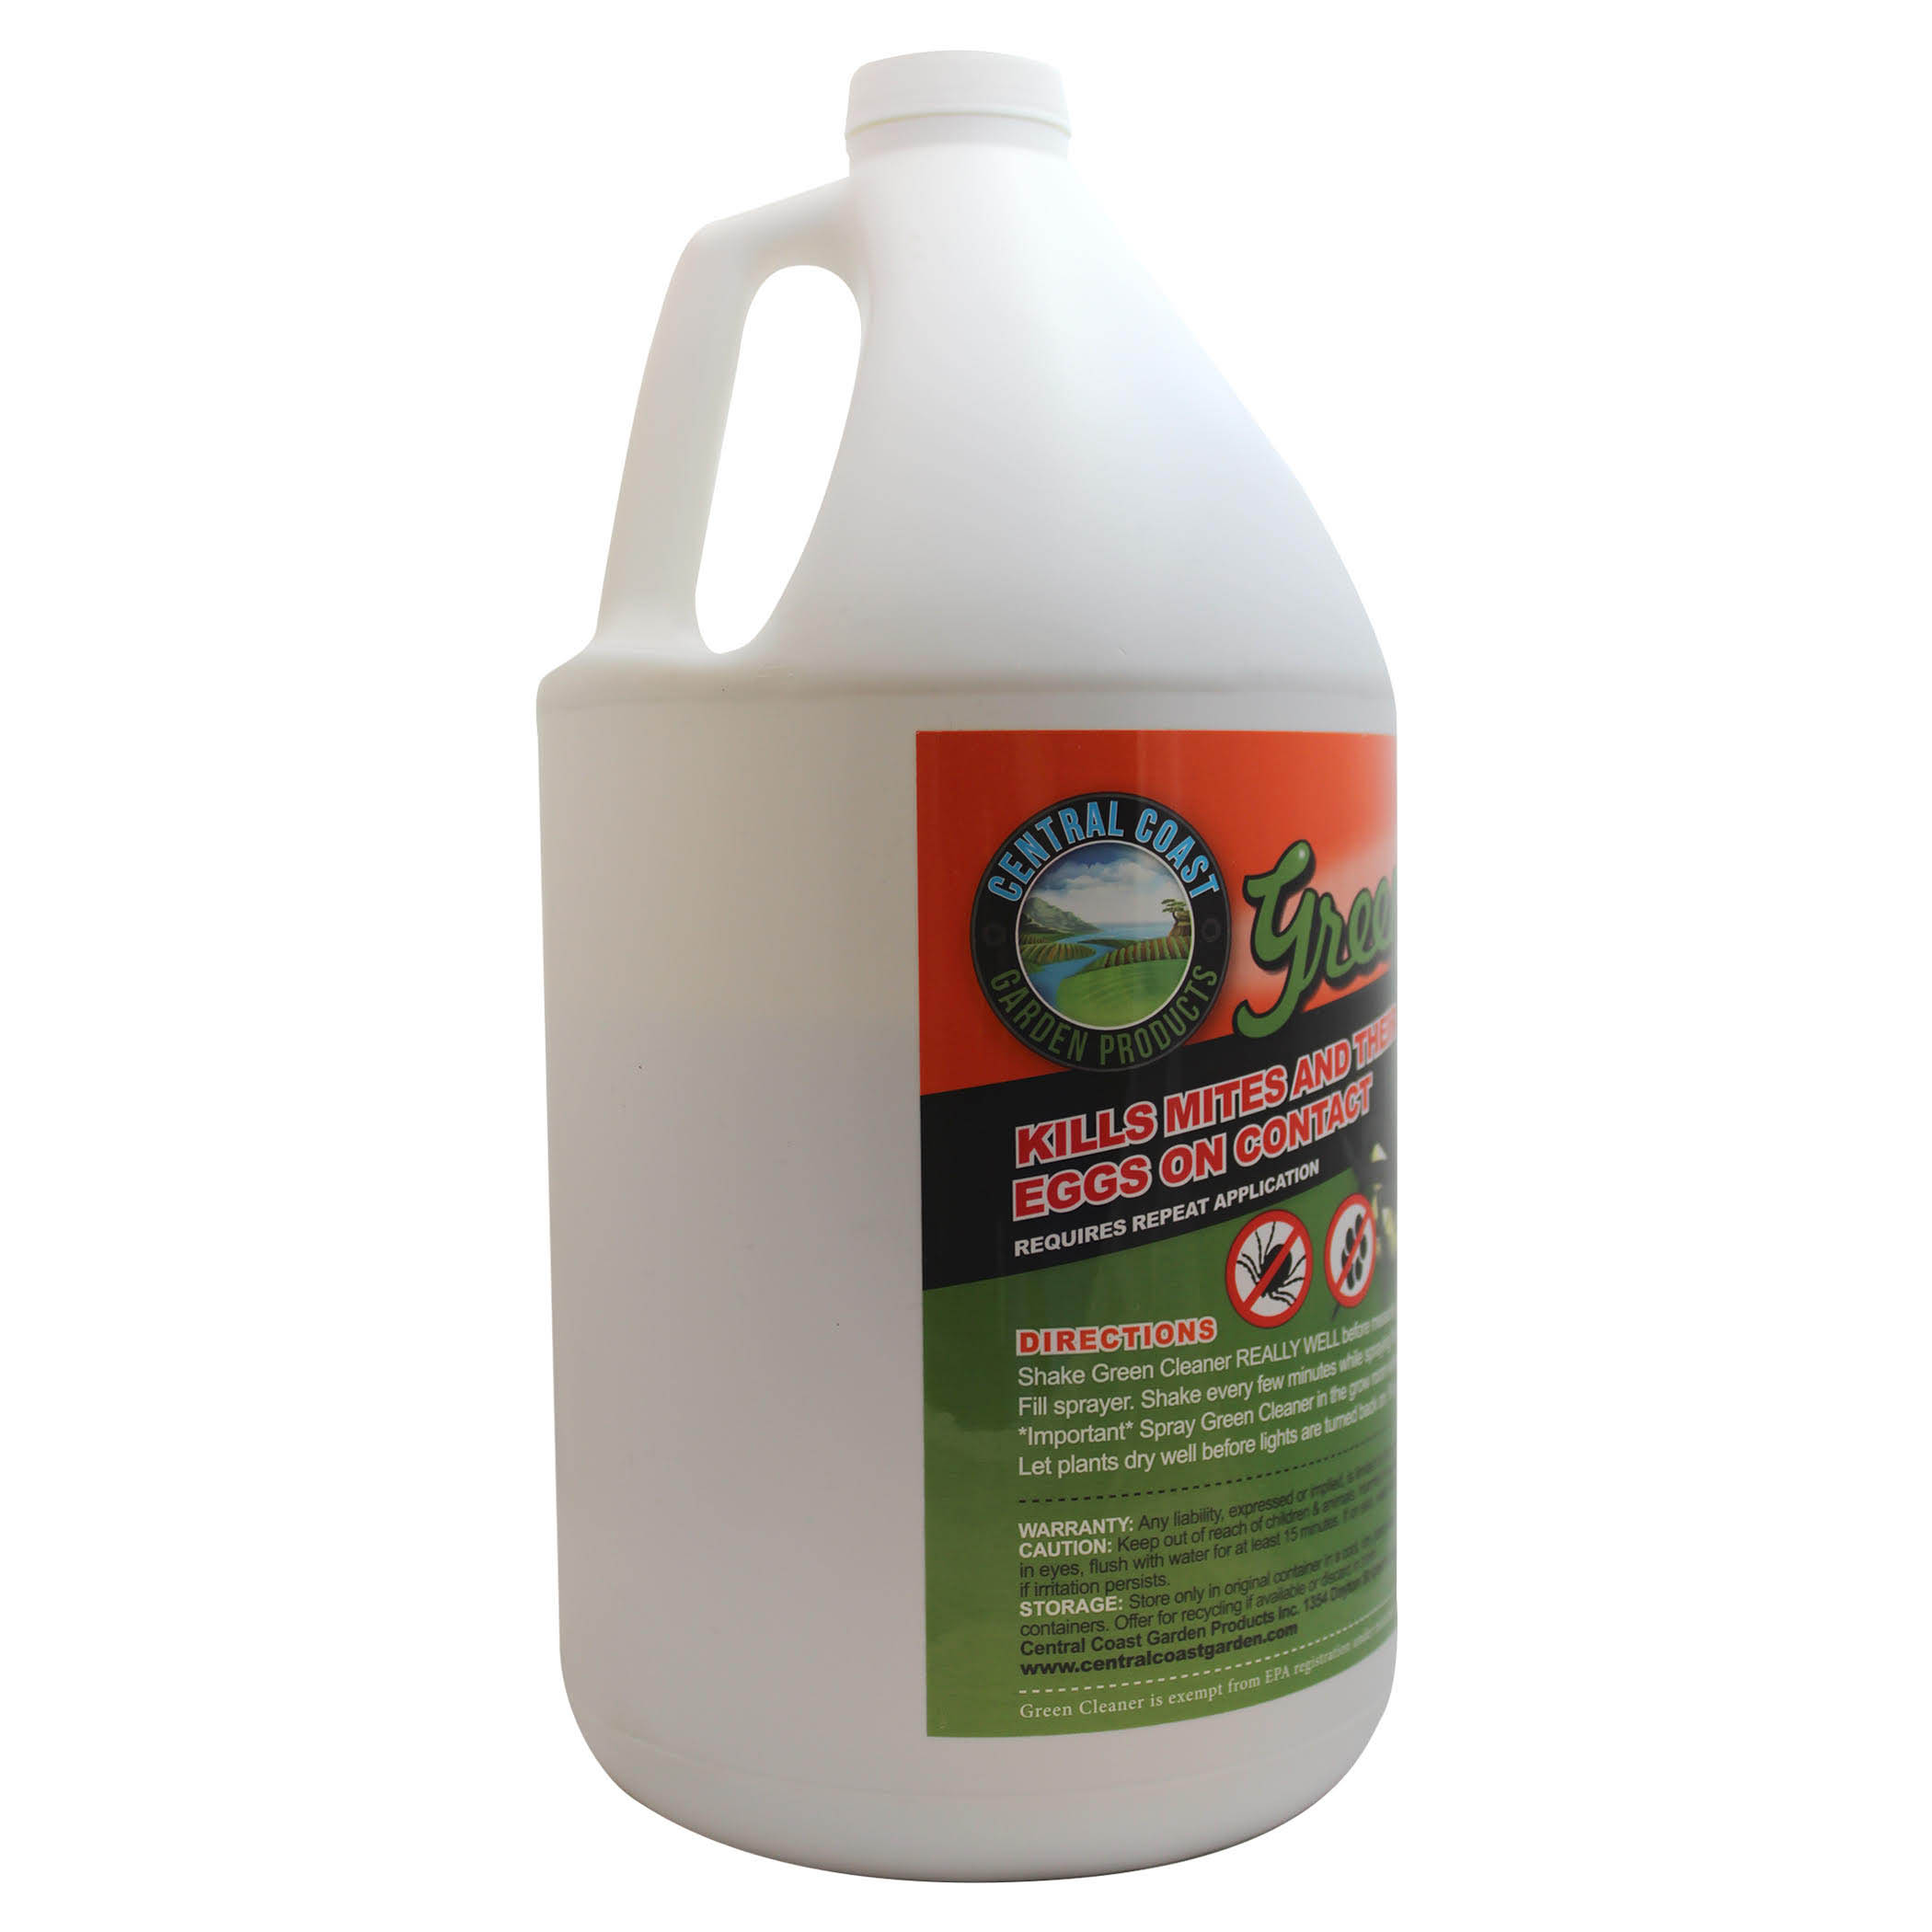 Picture for Green Cleaner, 1 gal